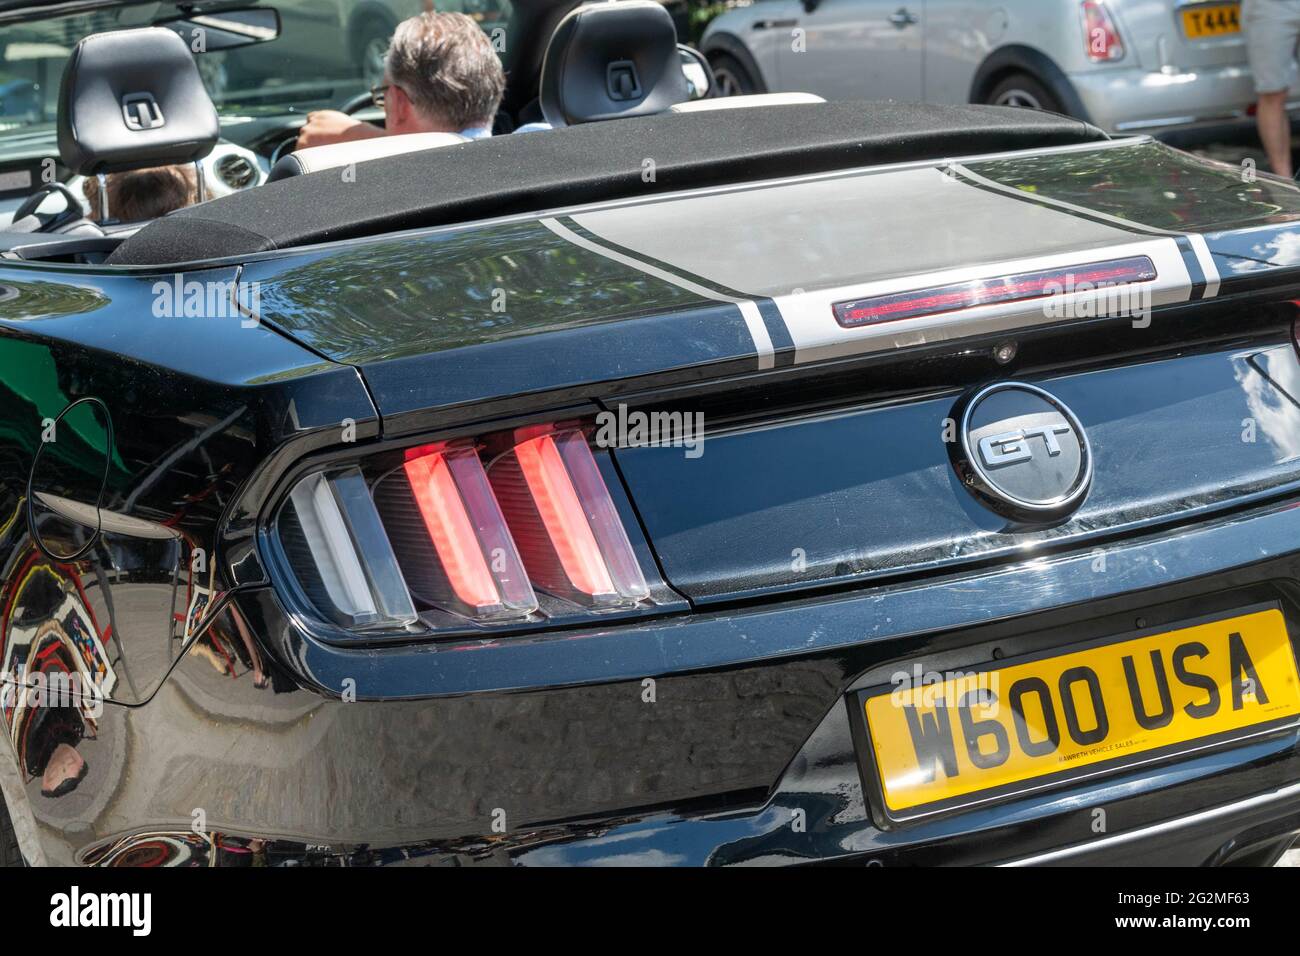 Brentwood Essex 12th June 2021 Muscle car parade, Brentwood High Street promoting a local event. Credit: Ian Davidson/Alamy Live News Stock Photo